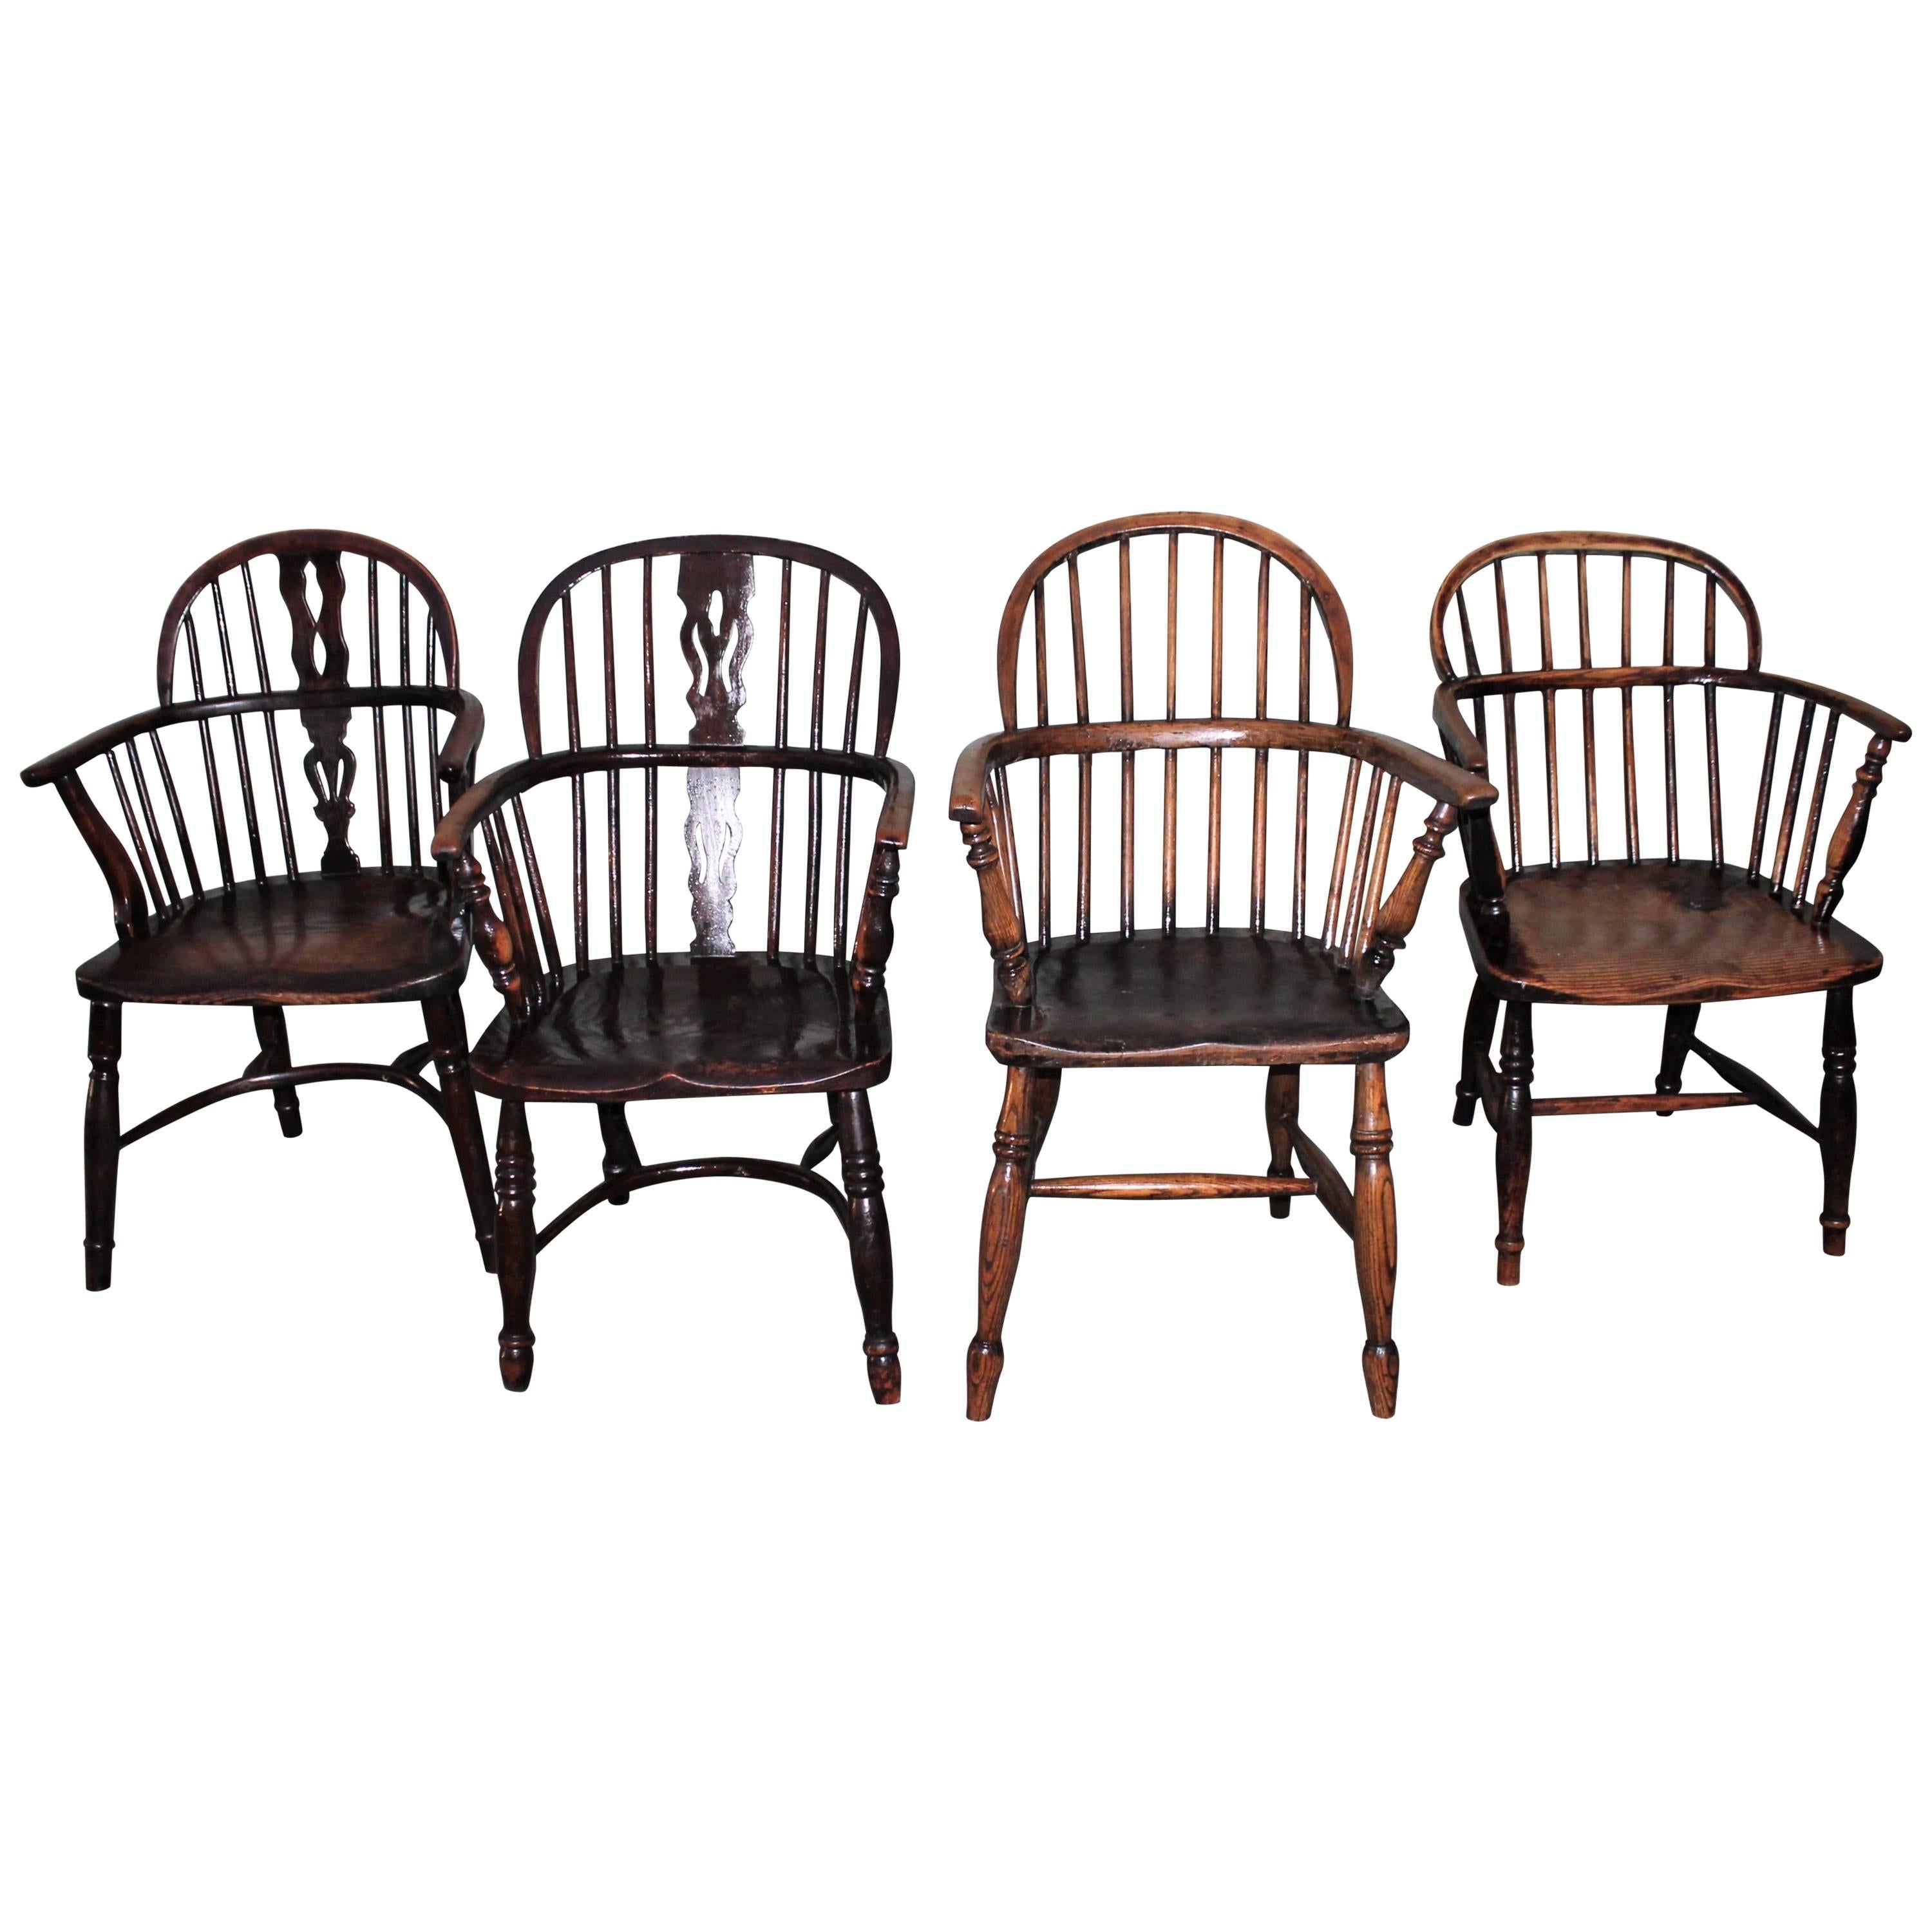 Windsor Chairs, Early 19th Century English Assembled Collection / 4